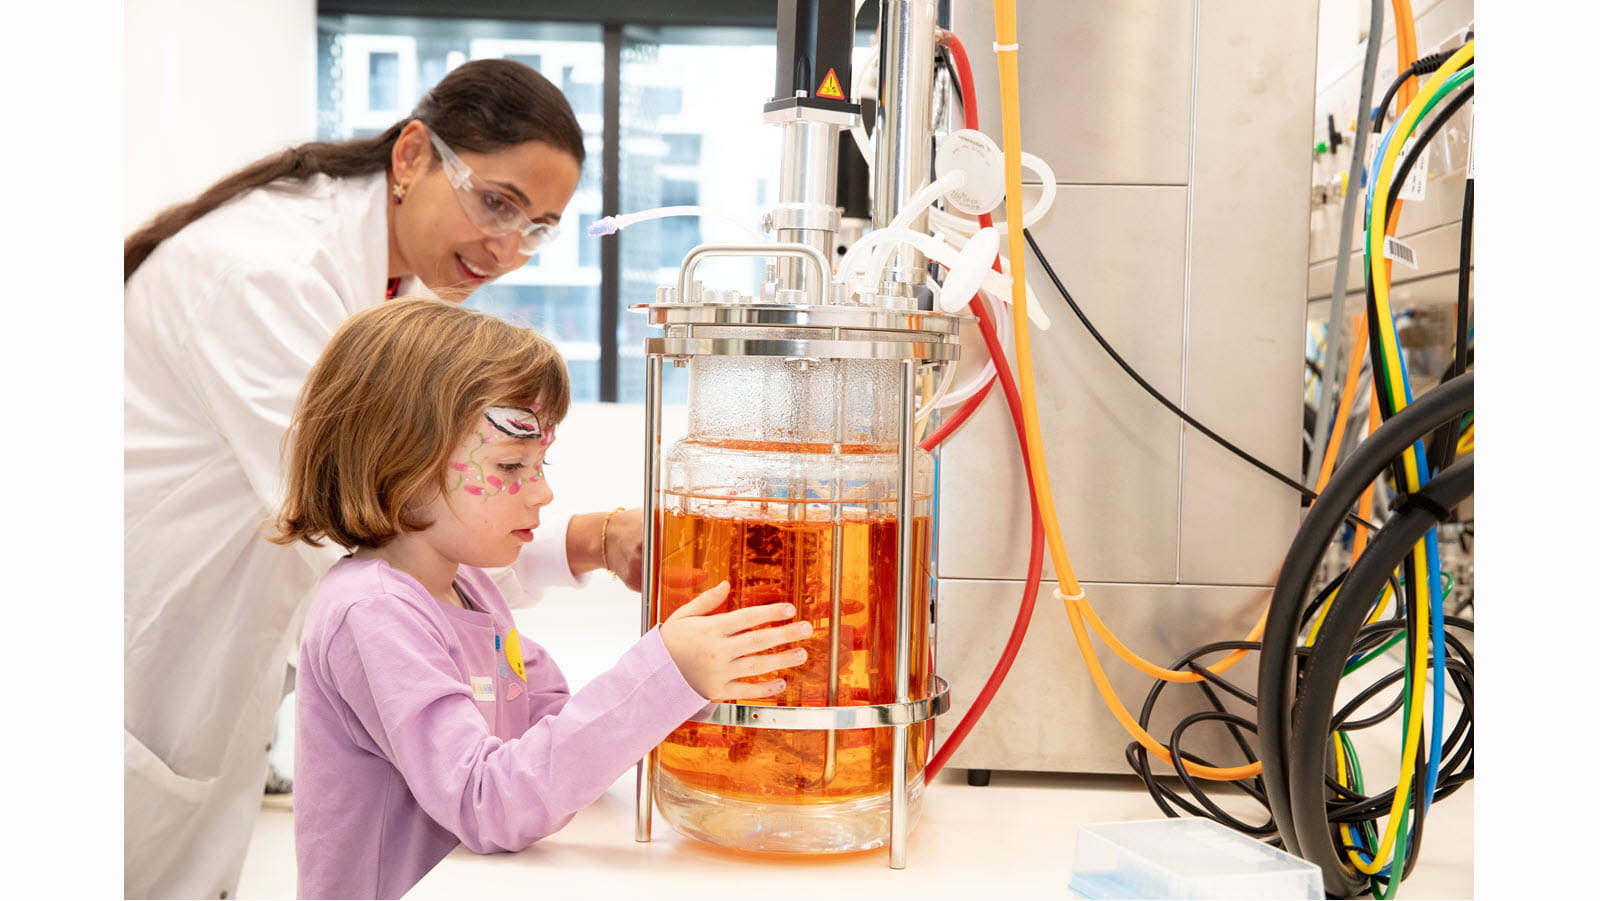 A child gets an up-close look at laboratory equipment during CSL's Friends & Family Day in Melbourne, Australia.